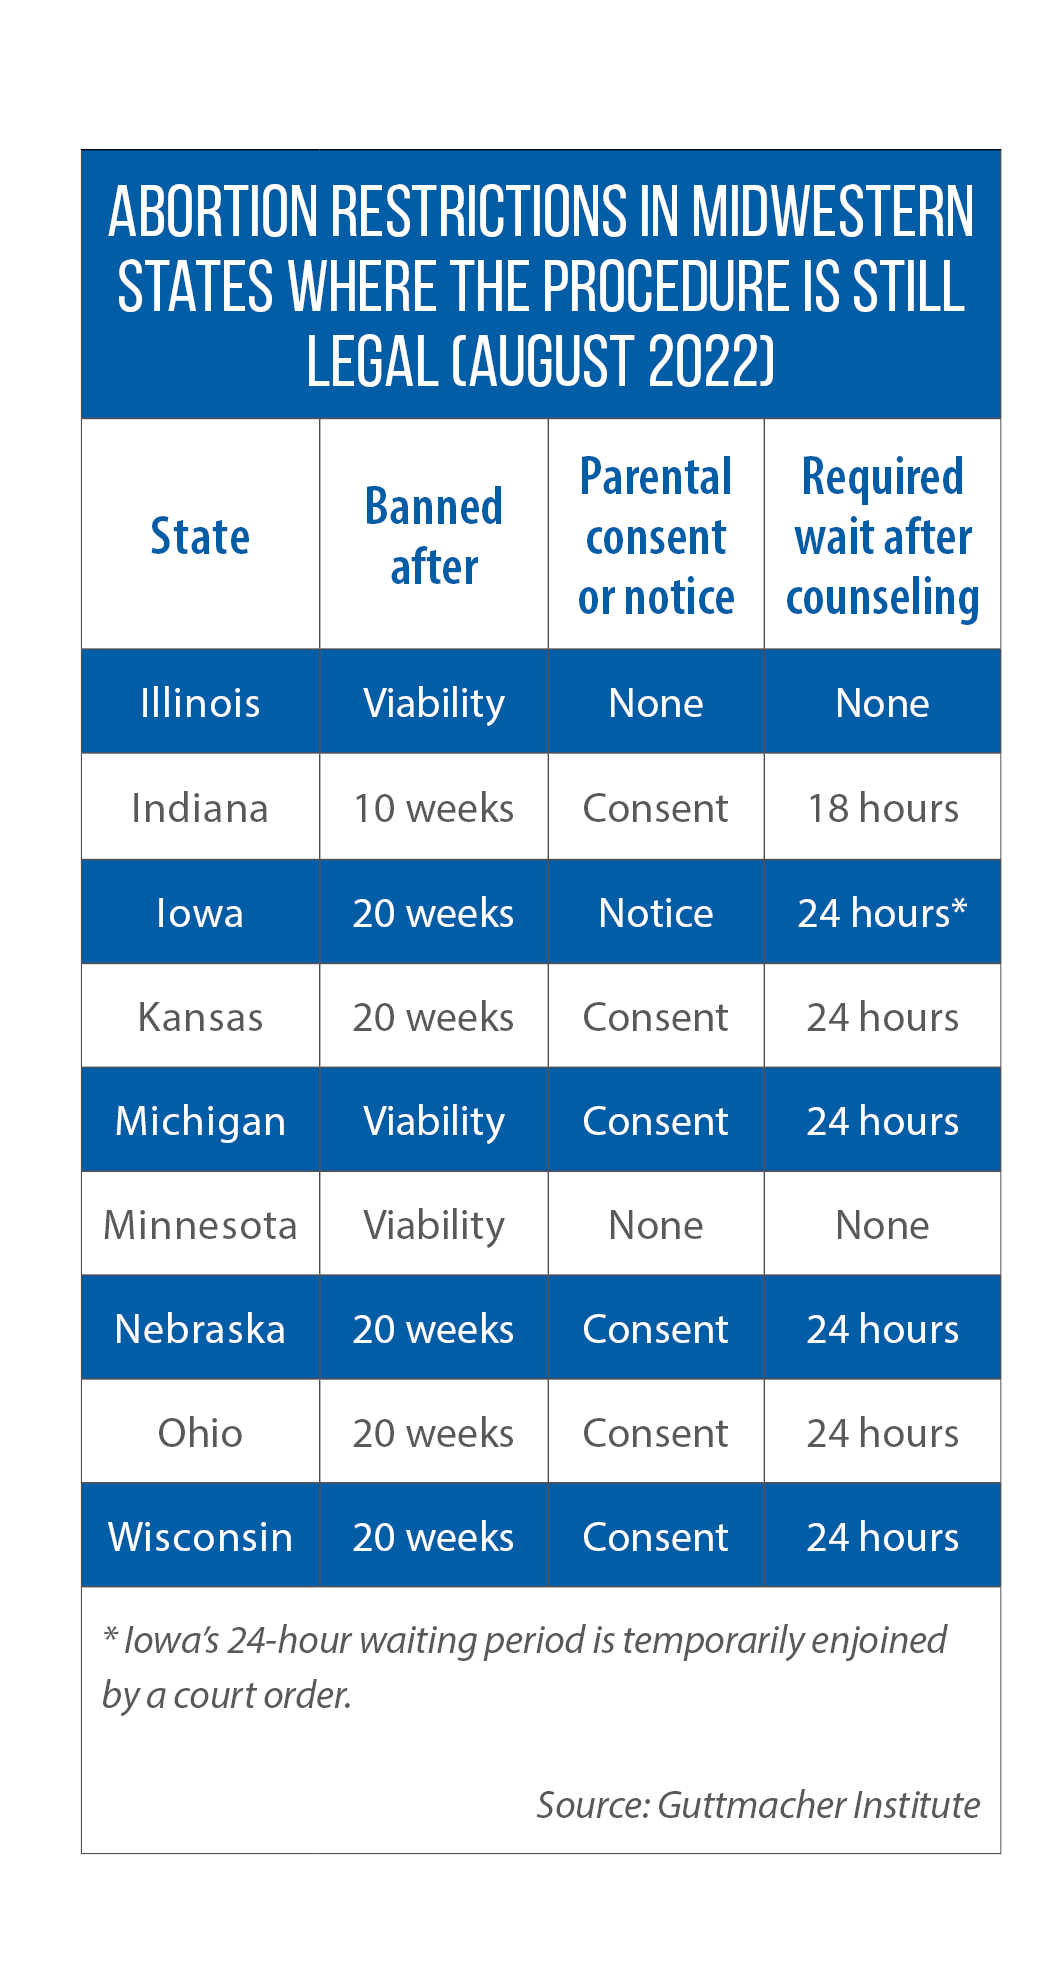 Listing of abortion restrictions in Midwestern states as of August 2022